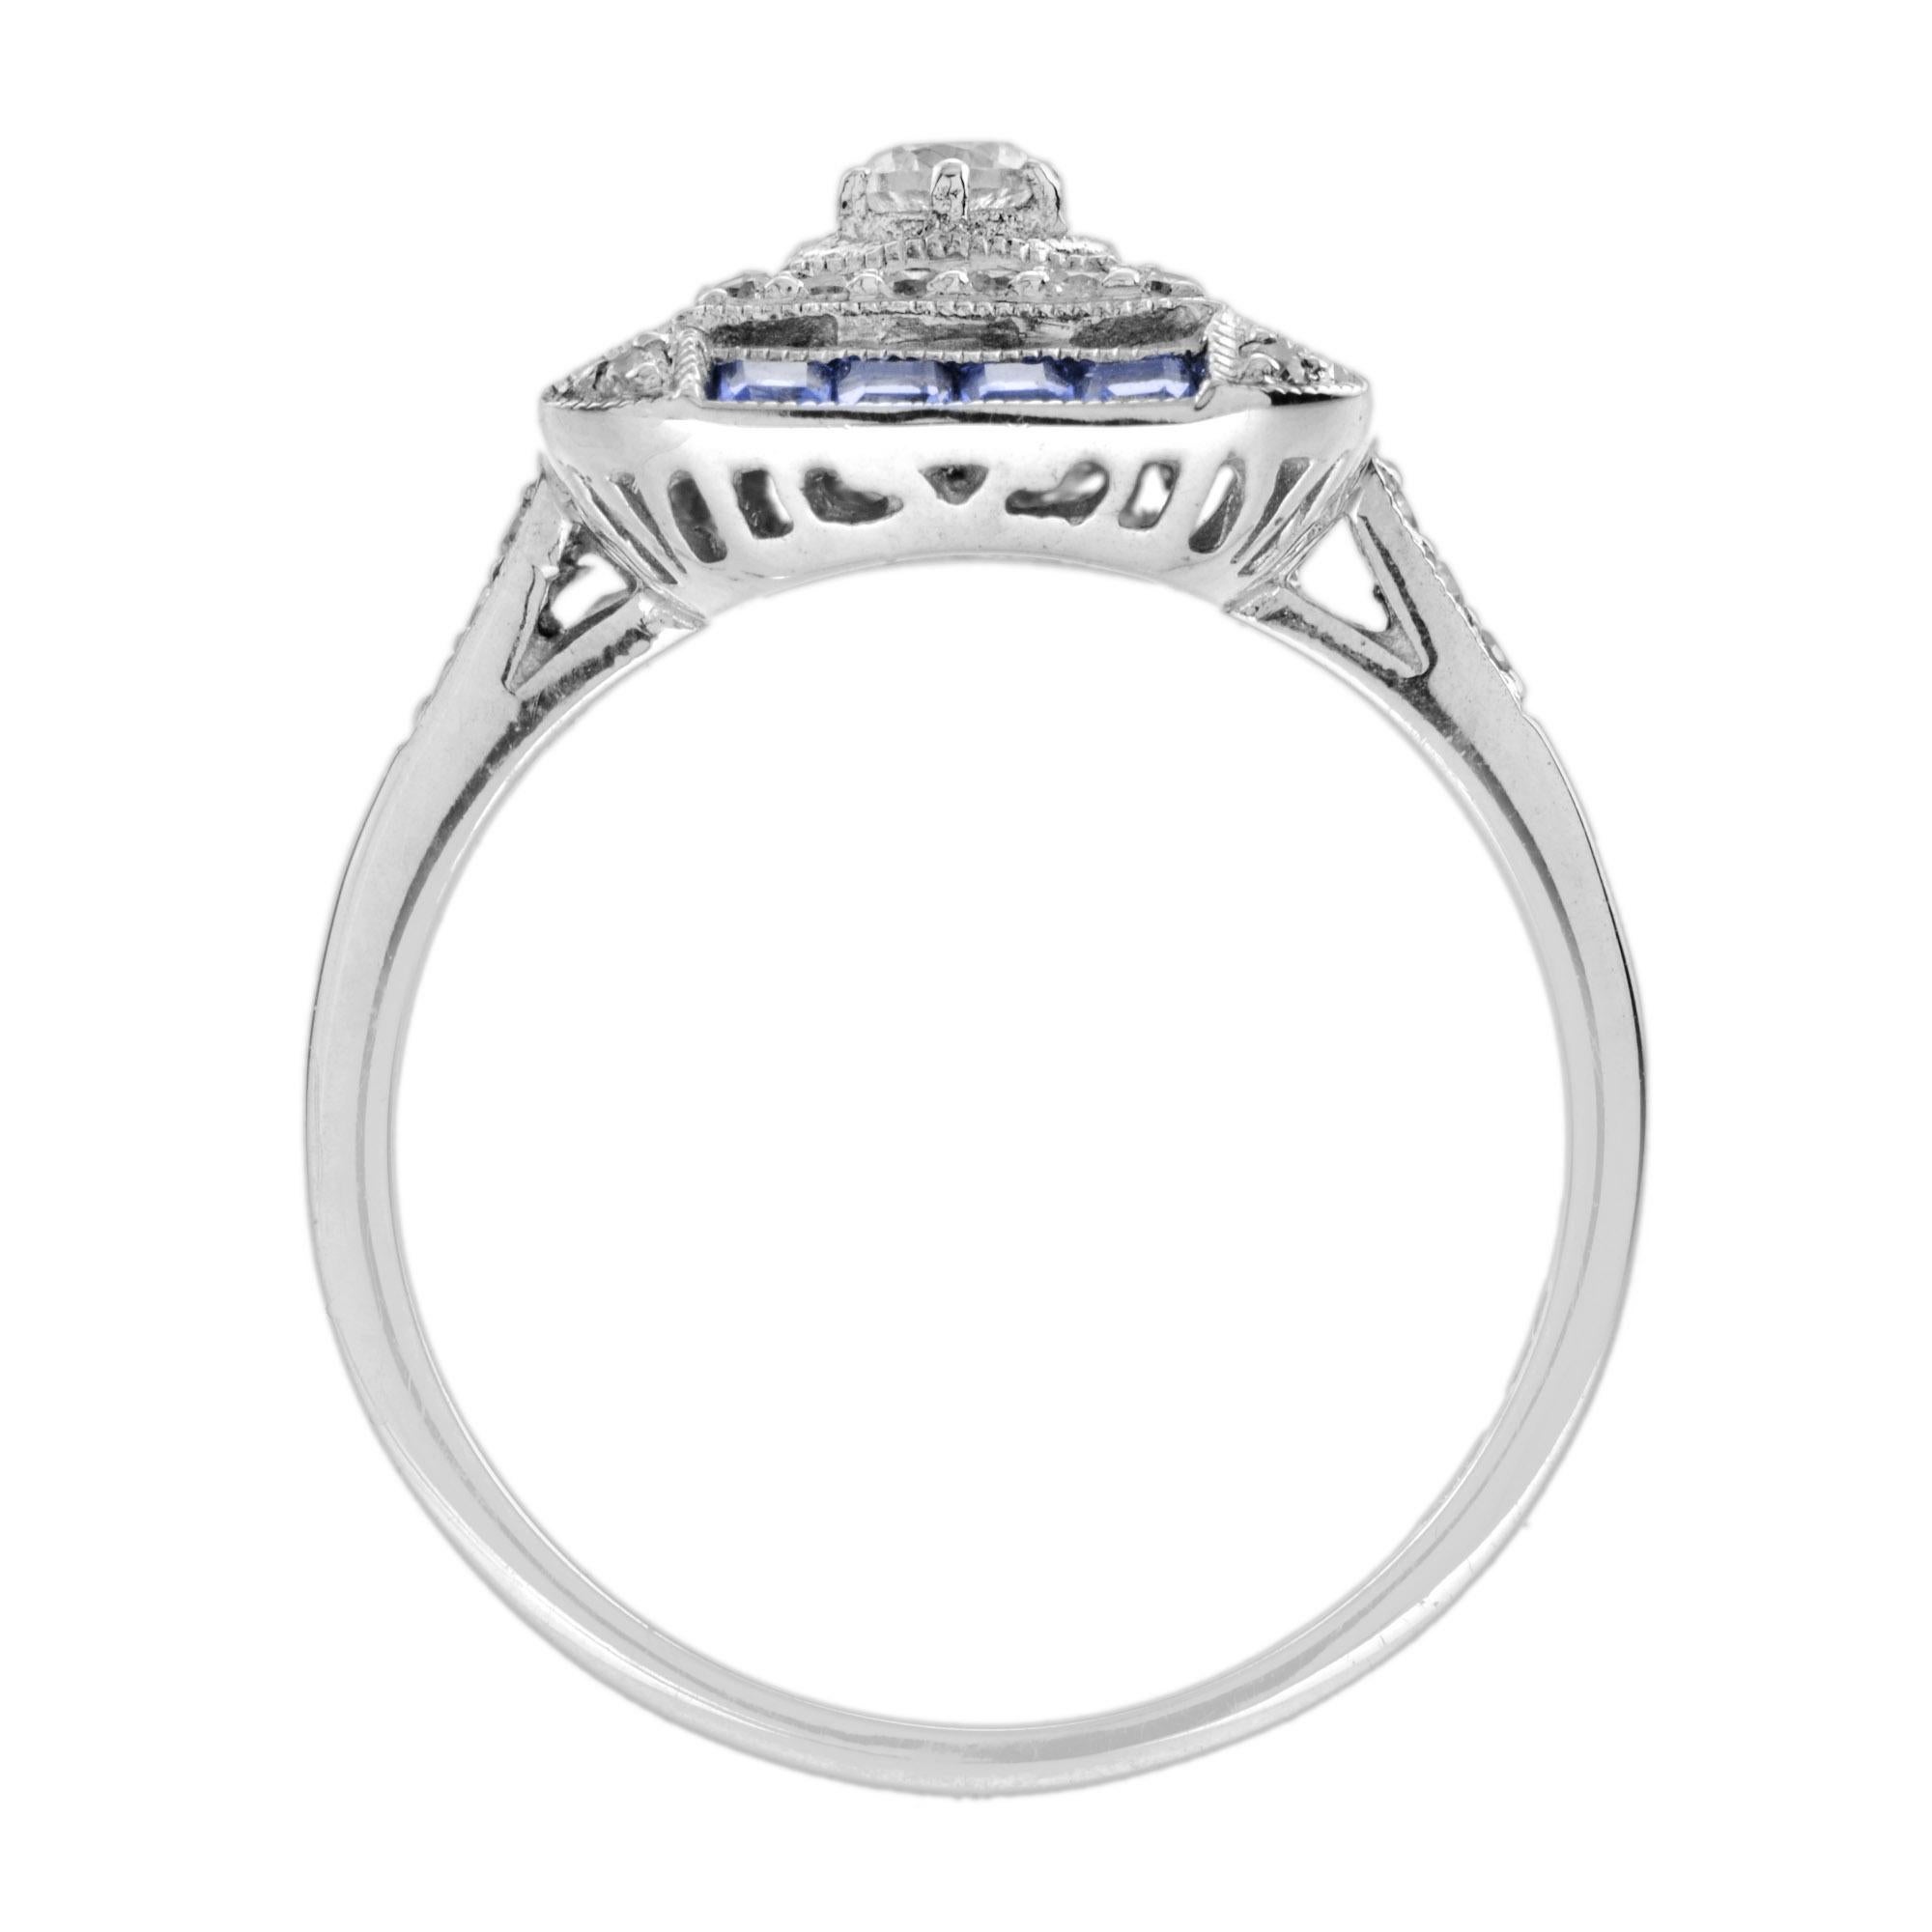 For Sale:  Diamond and Sapphire Art Deco Style Engagement Ring in 14K White Gold 5